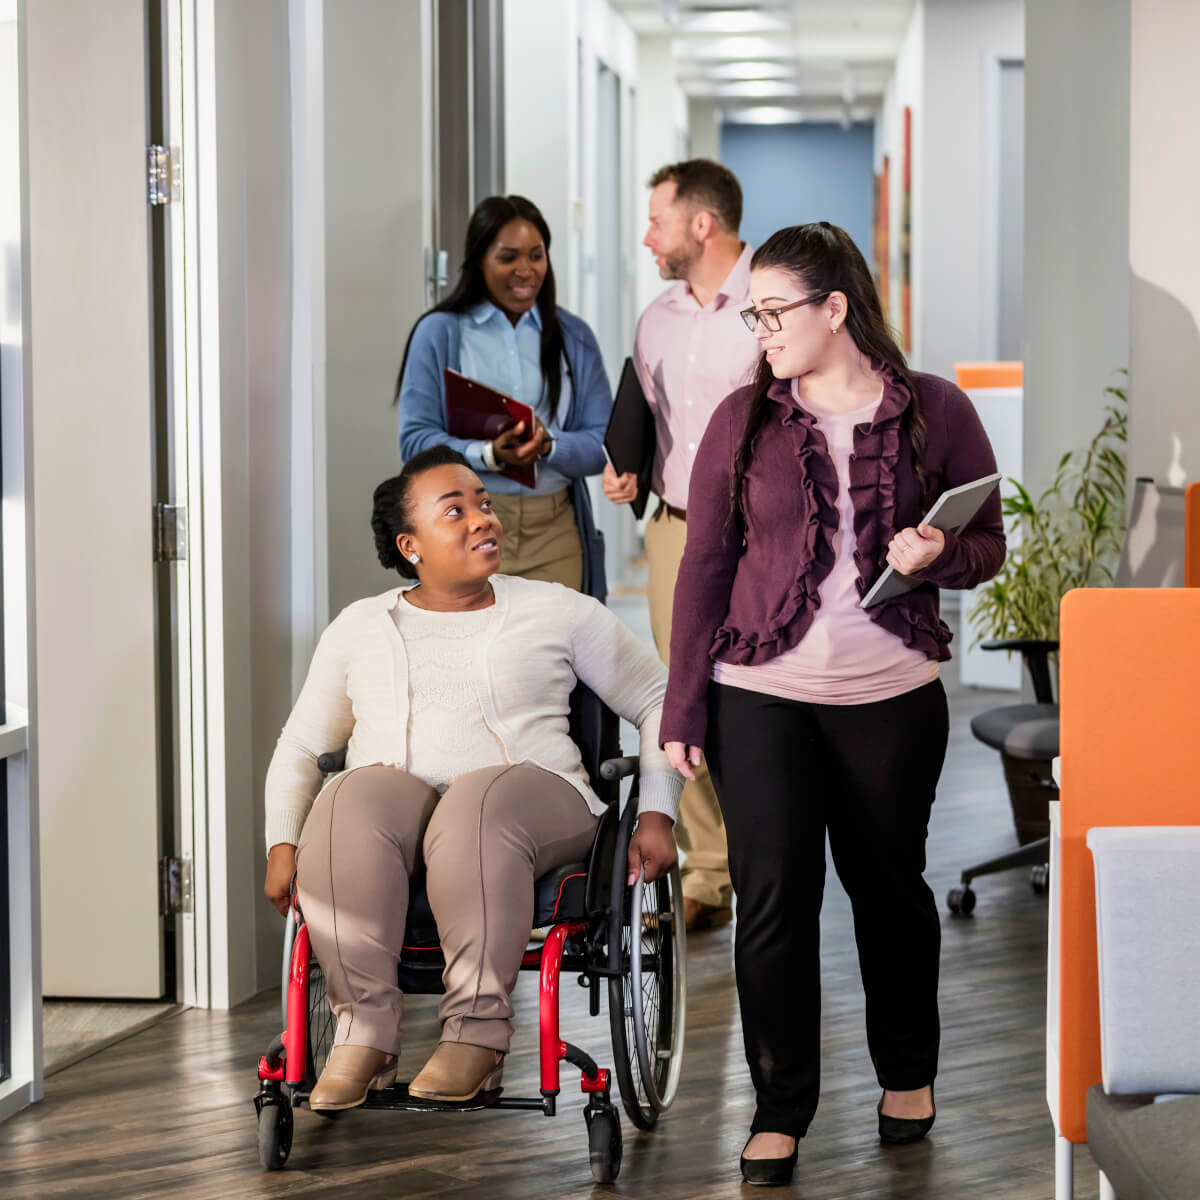 Group of business people talking and walking down an office corridor, one person in a wheelchair